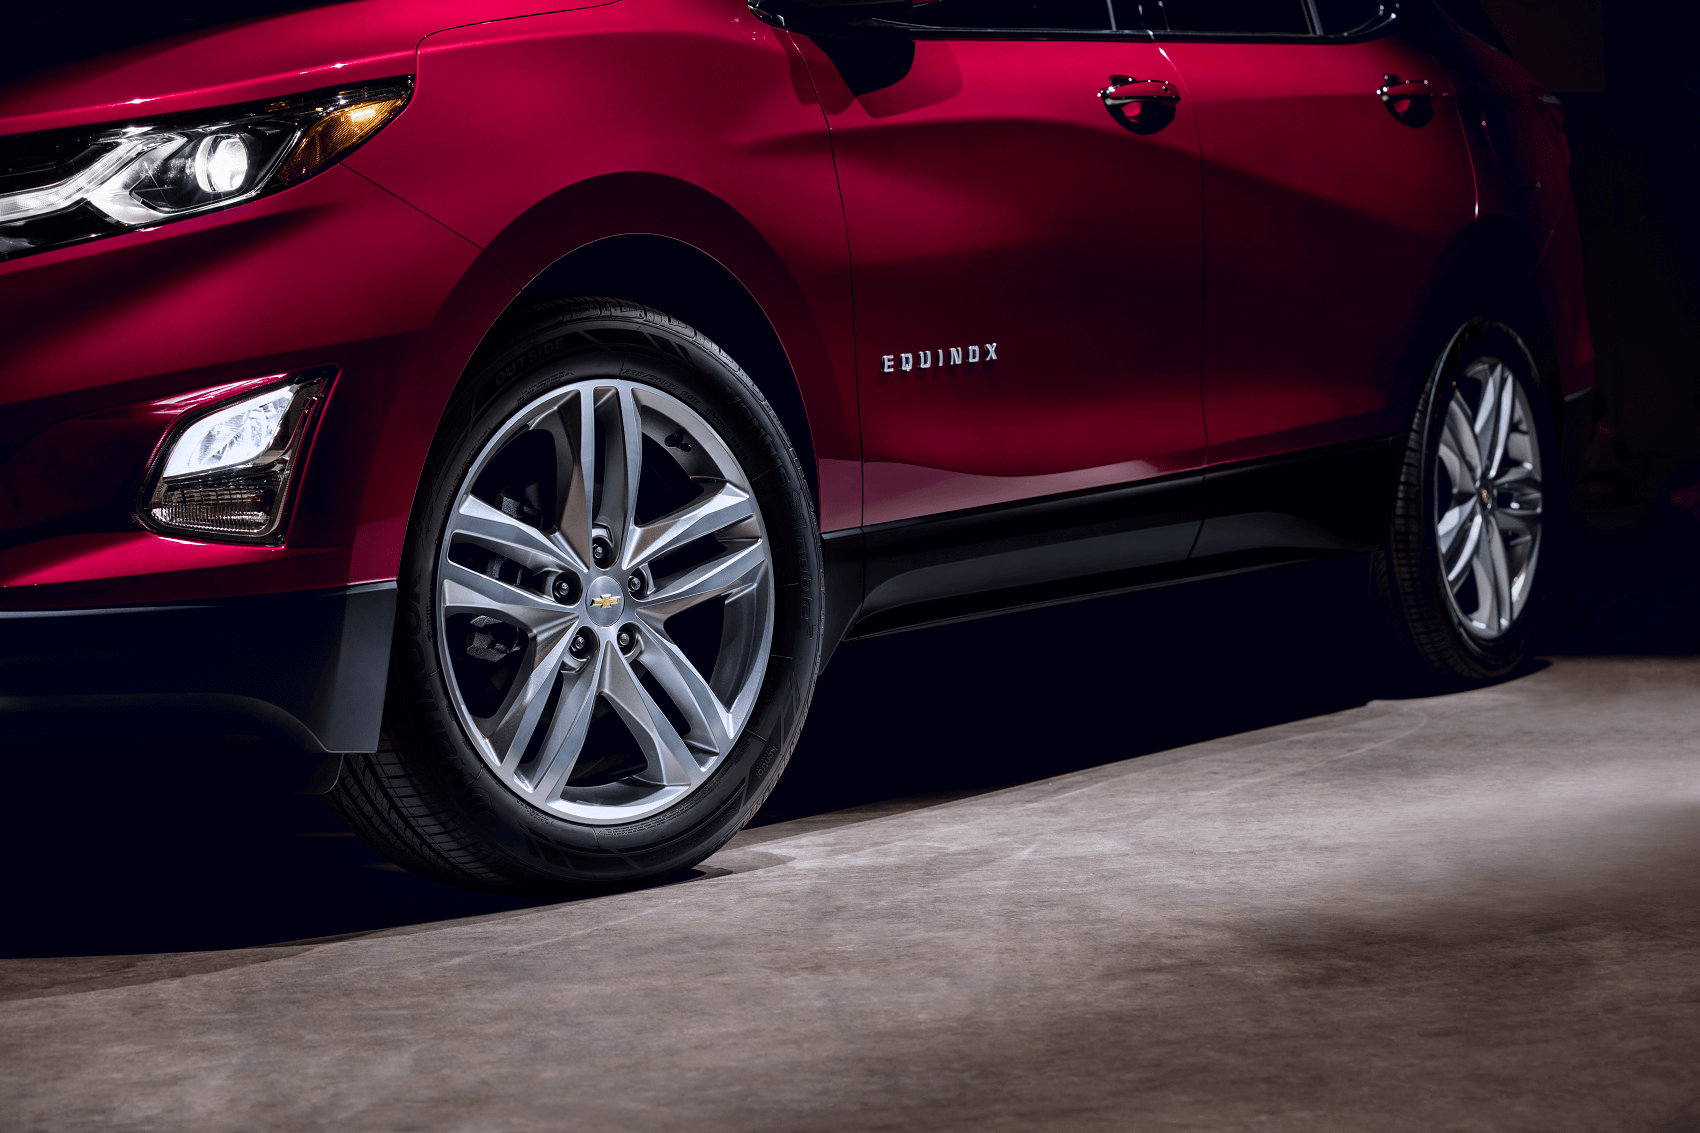 A shiny, red, brand-new Chevy Equinox is parked in a dramatically lit garage